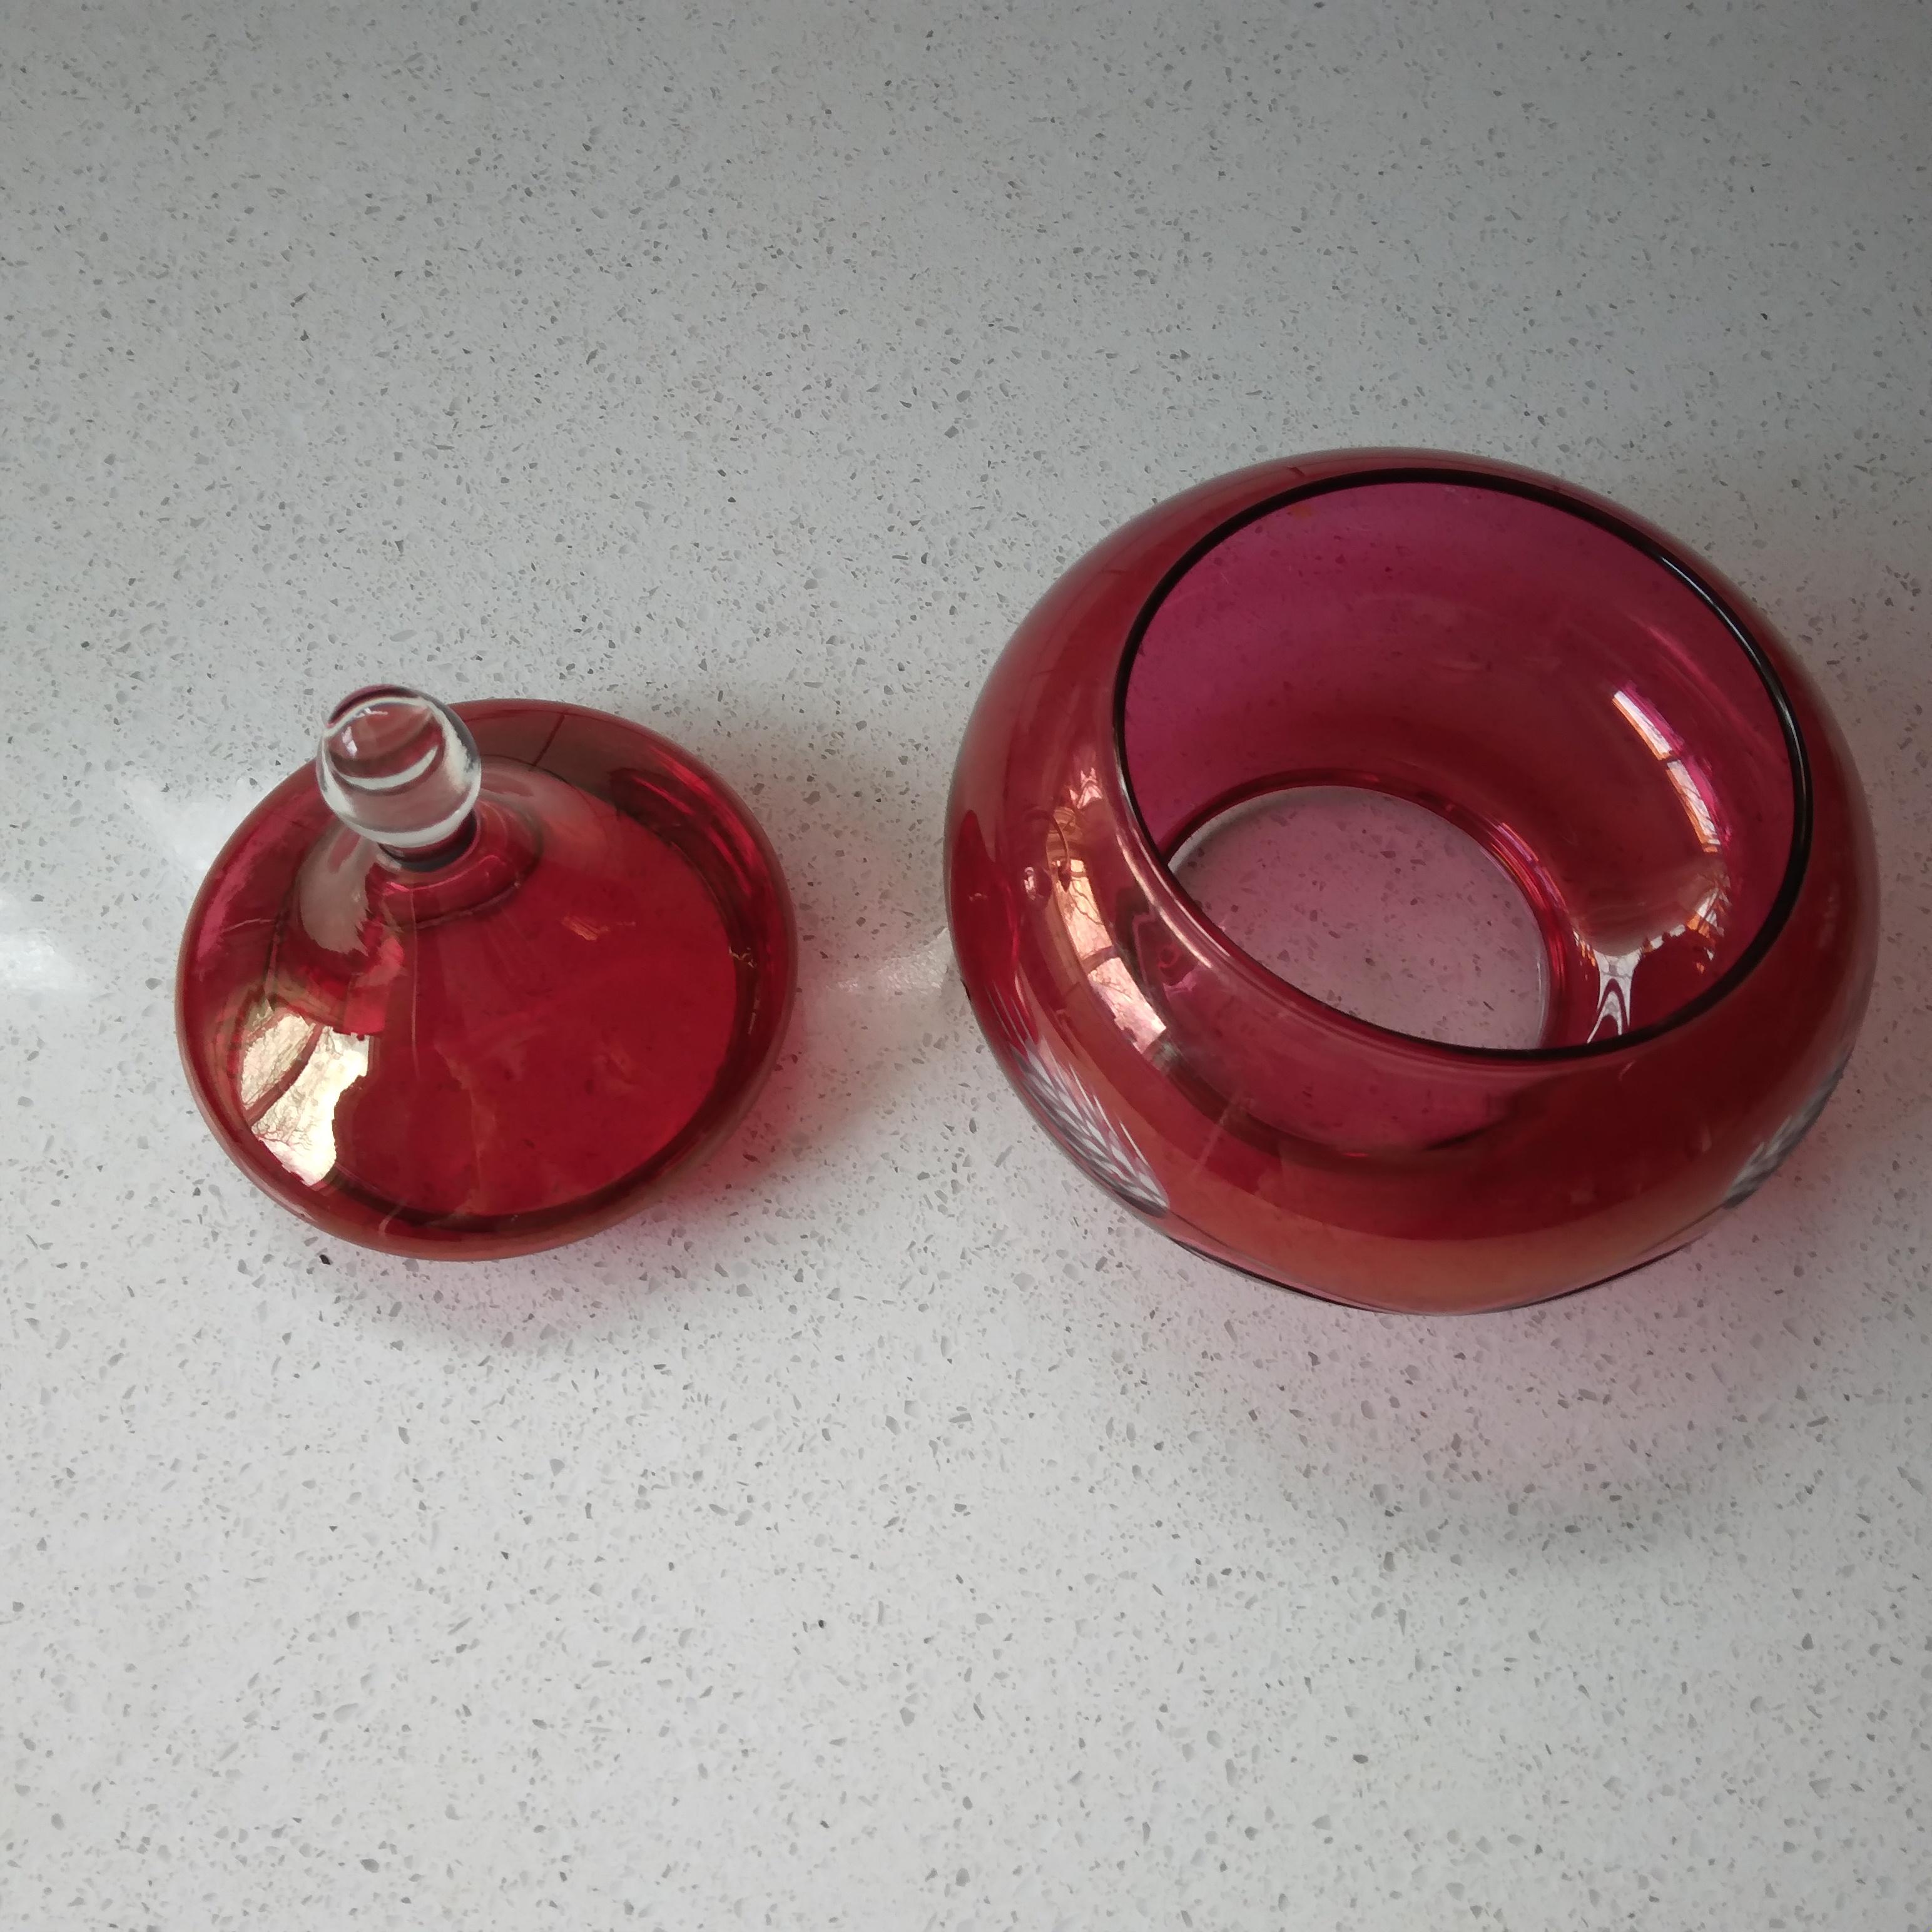 Gorgeous in cranberry and crystal, this vintage dish features an vintage wheat design and adorable, rounded shape. Perfect for a candy dish or sugar bowl. Some wear to pink from normal use.